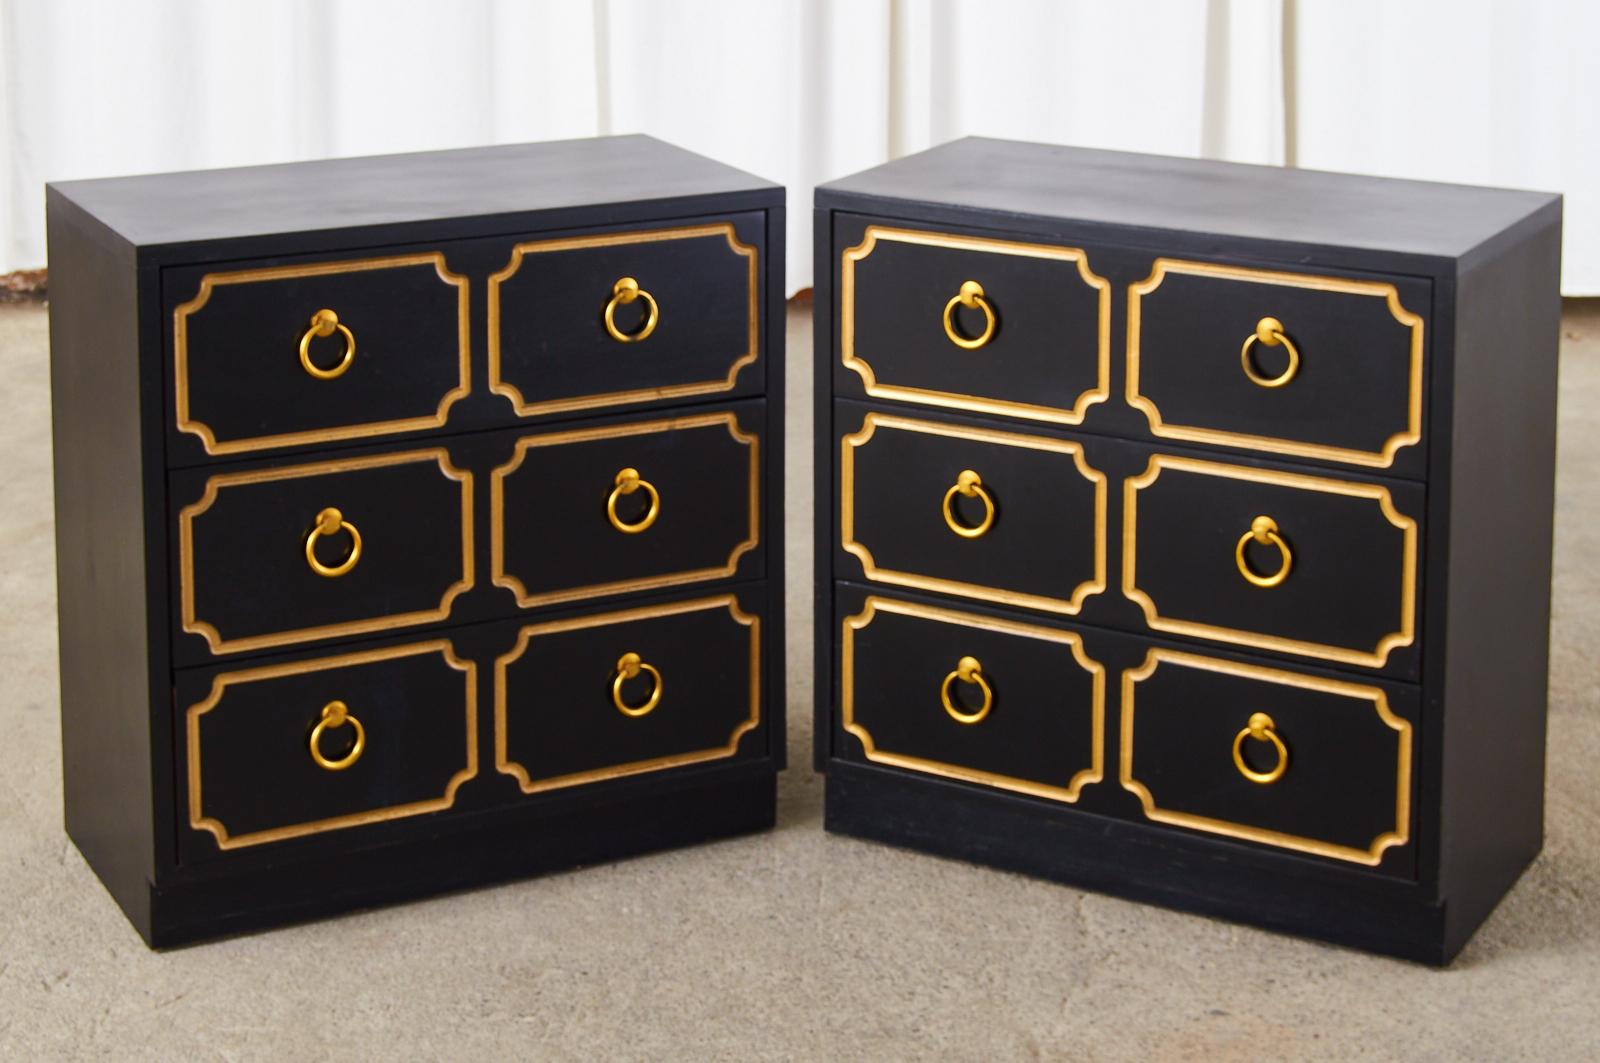 Matching pair of black and gold chest of drawers or commode dressers in the iconic style and manner of Dorothy Draper's Espana model. Hollywood Regency chests fronted by three drawers having pairs of brass ring pulls. The drawer fronts are decorated